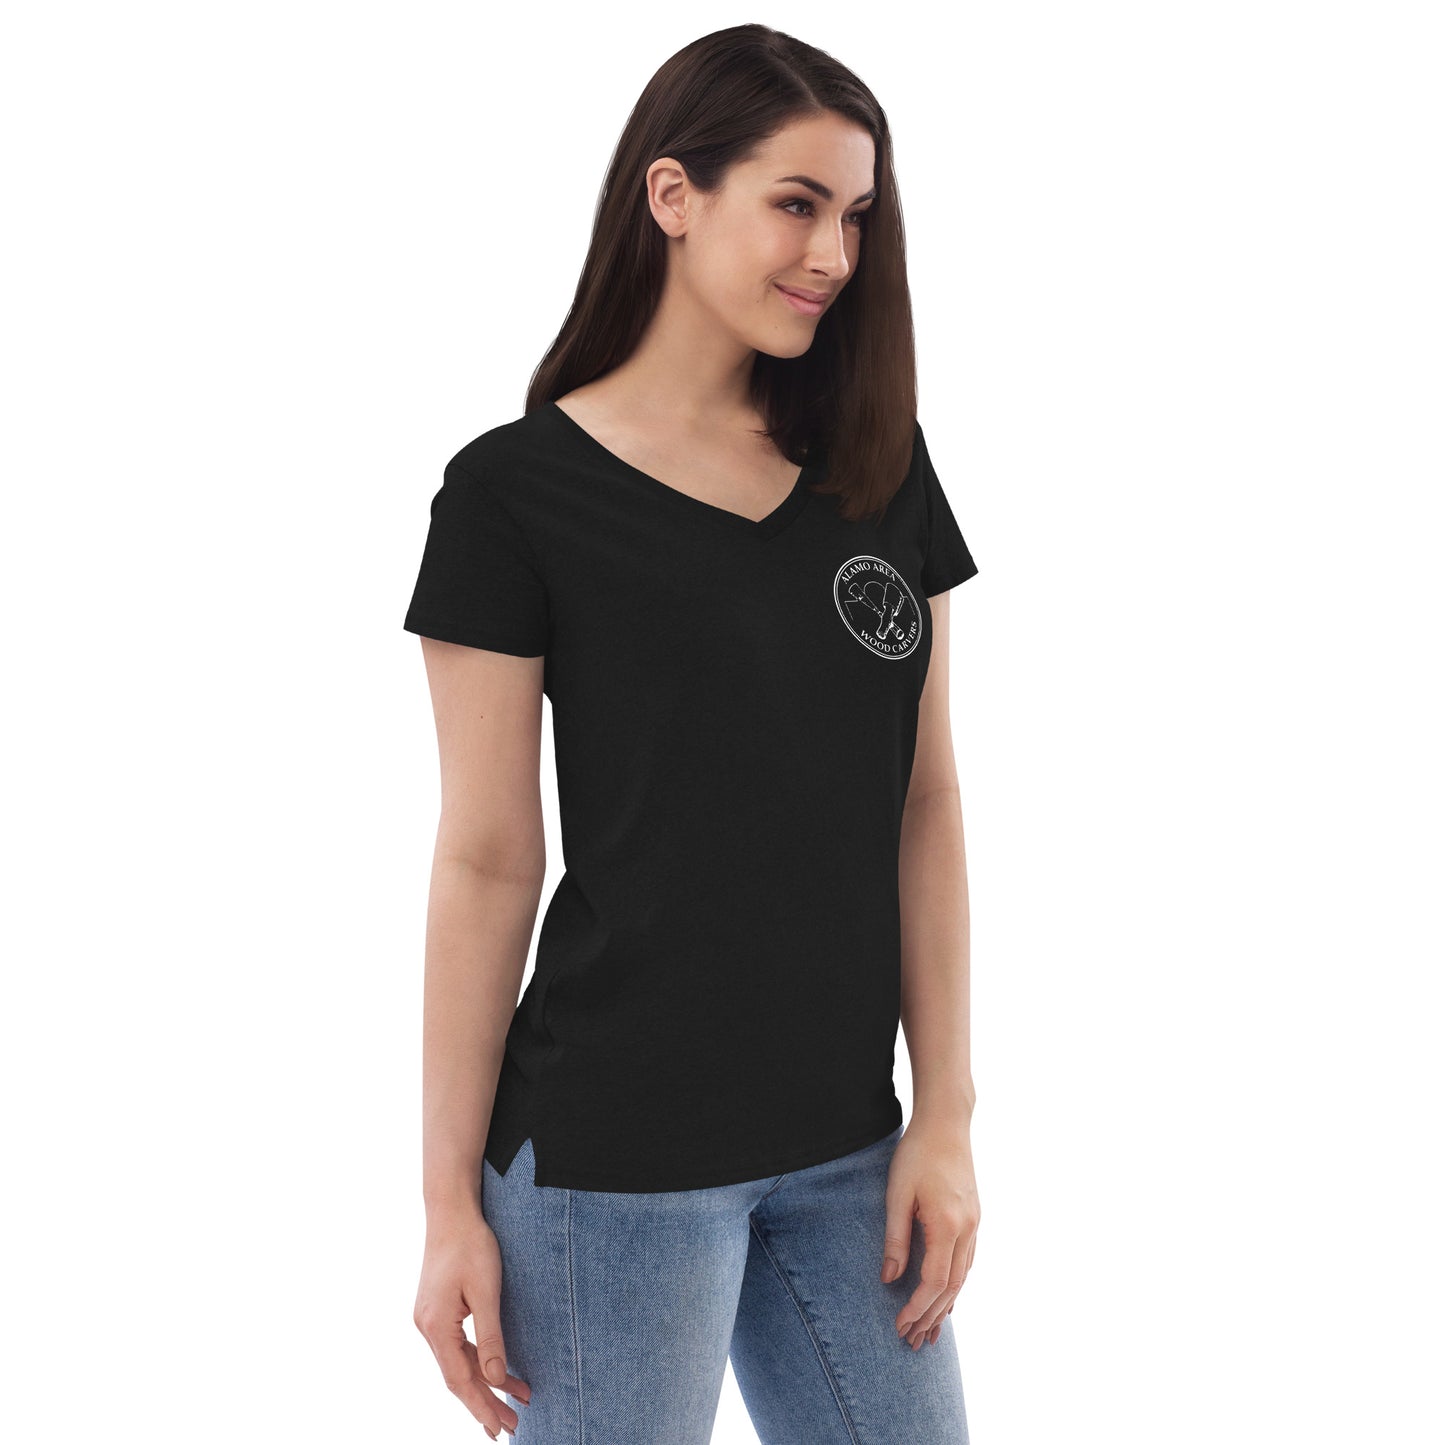 AAWC Standard Women’s recycled V-neck t-shirt